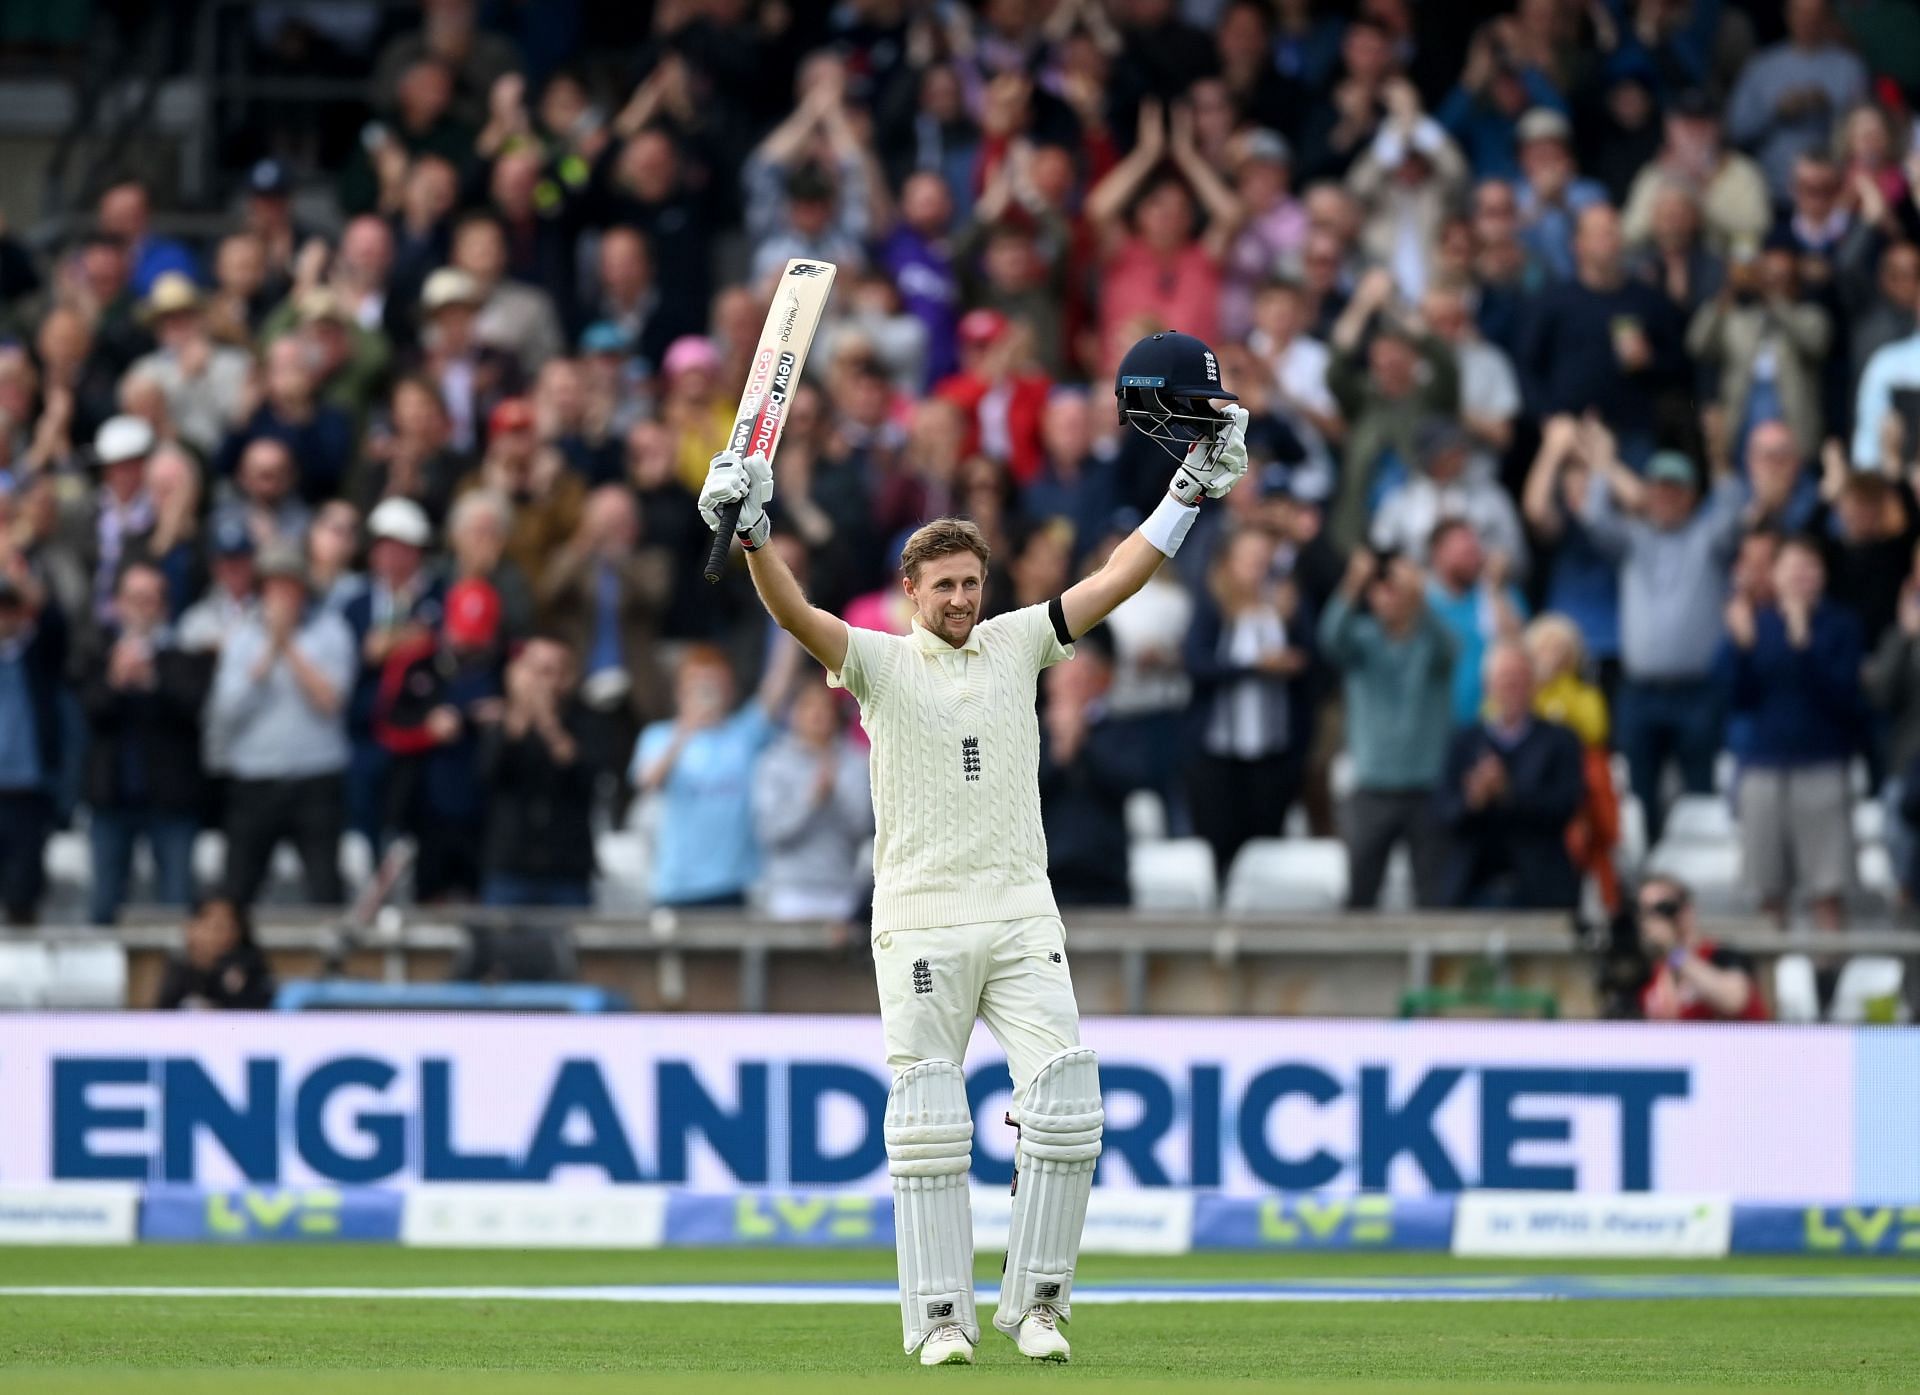 Joe Root celebrates scoring one of his centuries against India. (Pic: Getty)